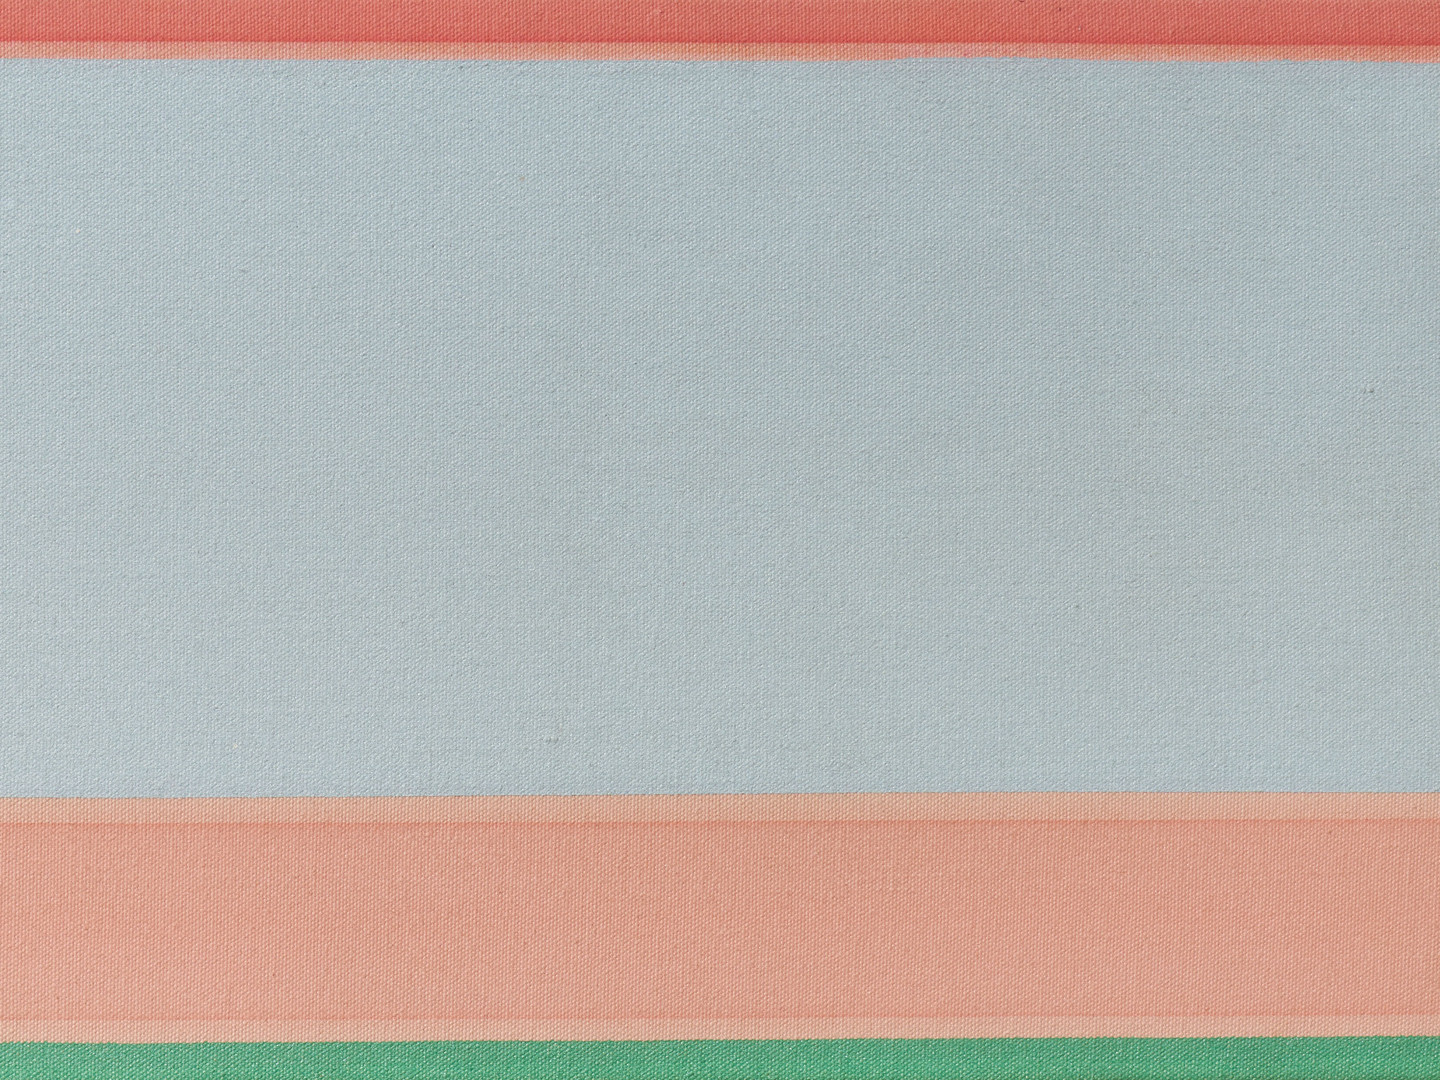 Kenneth Noland | Pace Gallery